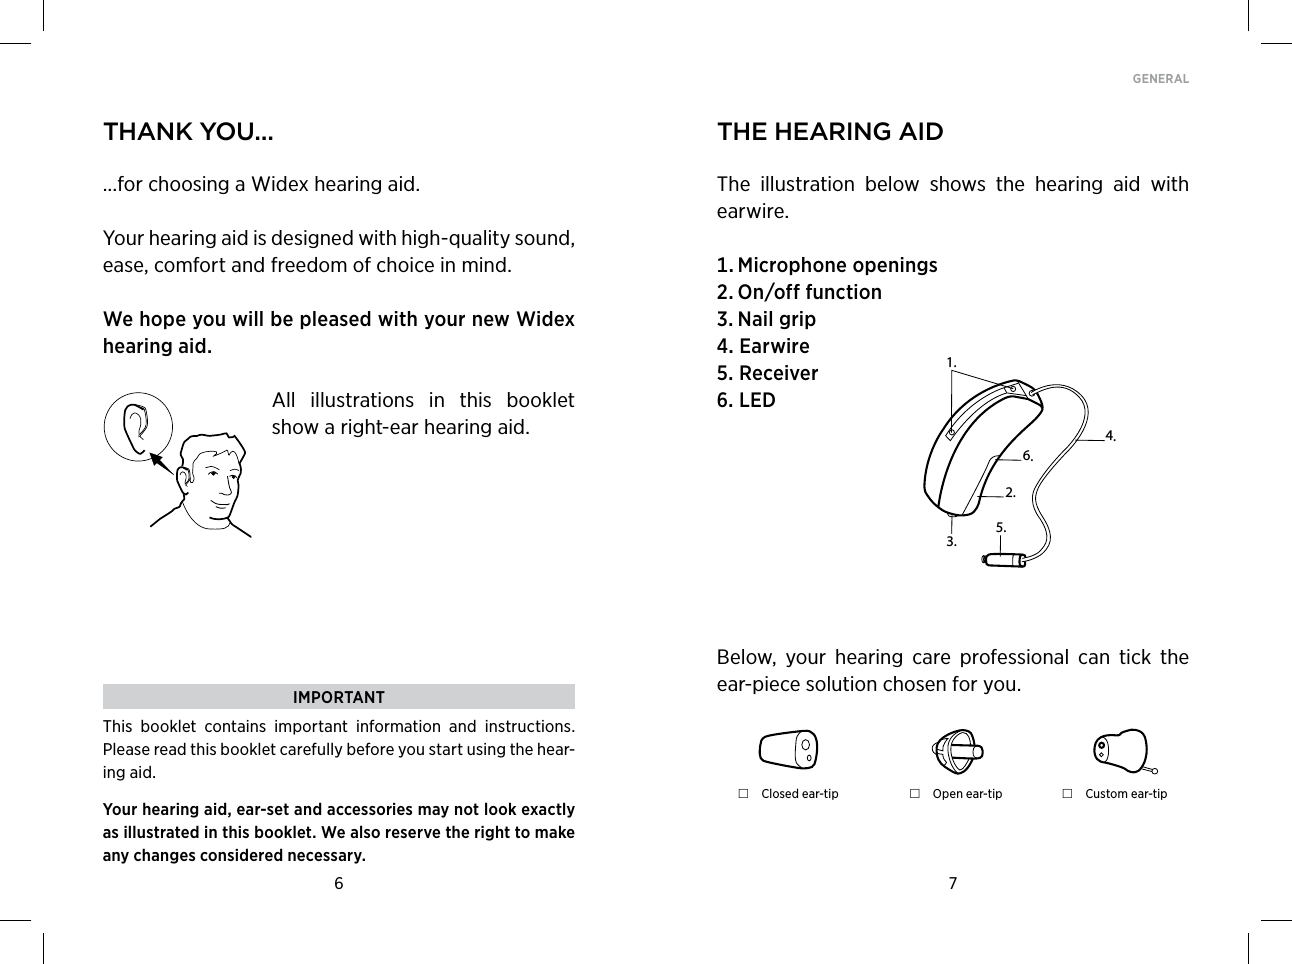 6 7GENERAL thank You......for choosing a Widex hearing aid.Your hearing aid is designed with high-quality sound, ease, comfort and freedom of choice in mind.  We hope you will be pleased with your new Widex hearing aid.All  illustrations  in  this  booklet show a right-ear hearing aid.  the hearing aidThe  illustration  below  shows  the  hearing  aid  with earwire. Microphoneopenings Onofffunction NailgripEarwireReceiverLEDIMPORTANTThis  booklet  contains  important  information  and  instructions. Please read this booklet carefully before you start using the hear-ing aid.Your hearing aid, ear-set and accessories may not look exactly as illustrated in this booklet. We also reserve the right to make any changes considered necessary.1.2.3.5.4.6.Below,  your  hearing  care  professional  can  tick  the ear-piece solution chosen for you. Closed ear-tip  Open ear-tip  Custom ear-tip